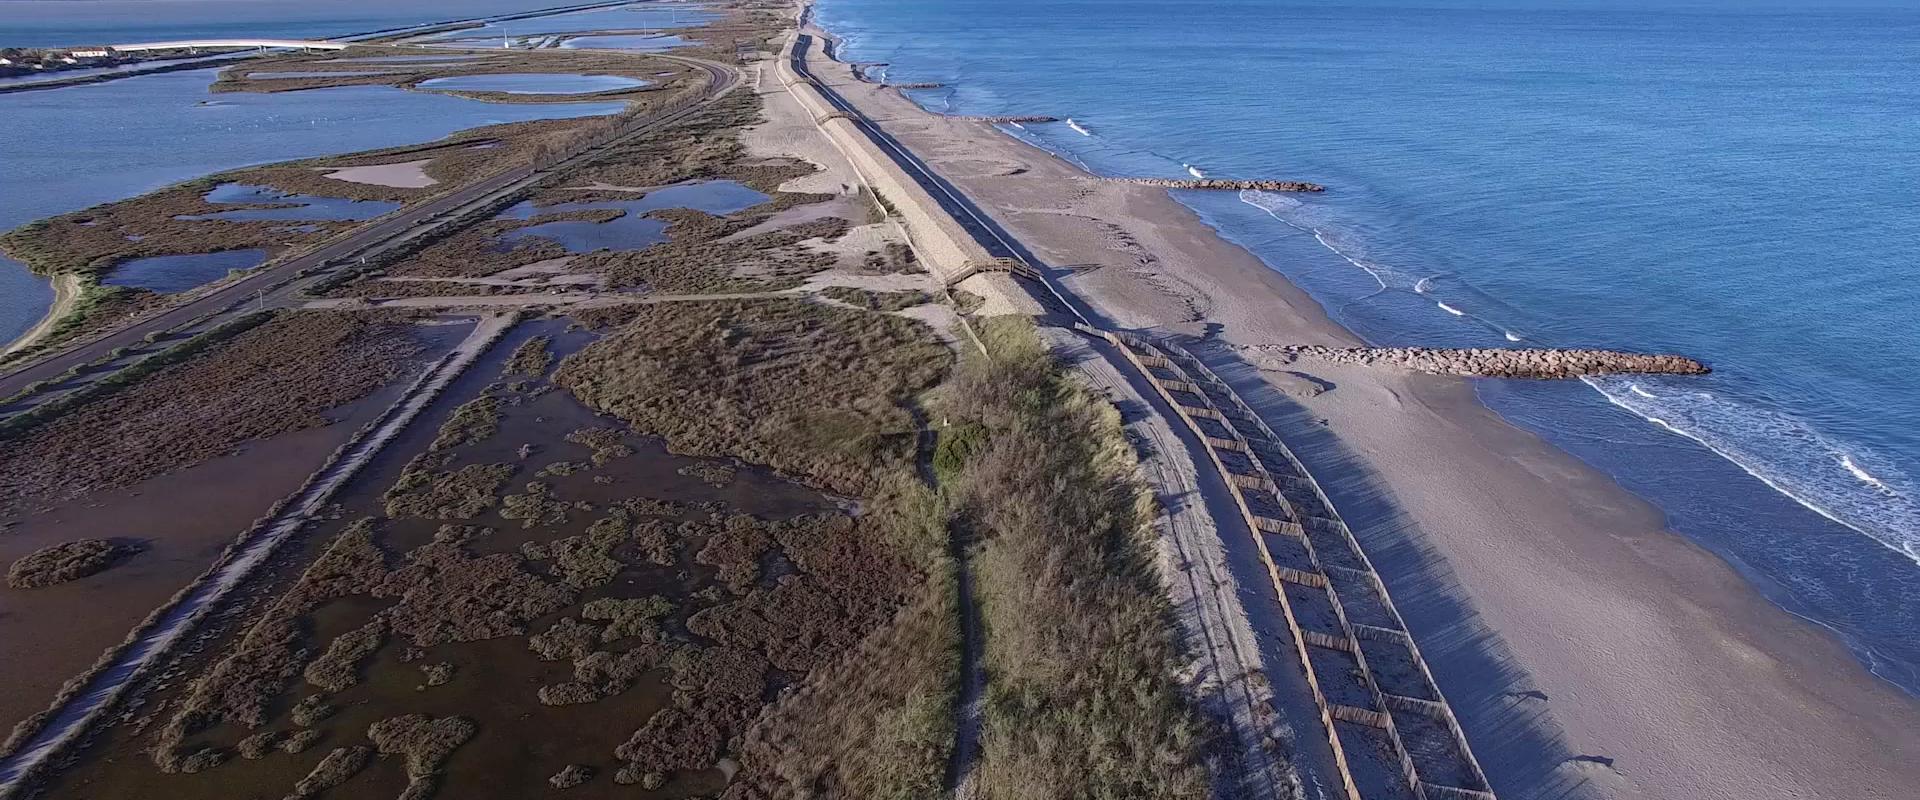 Extract from the film "Coastline management on the sandy coast of the Occitanie region"